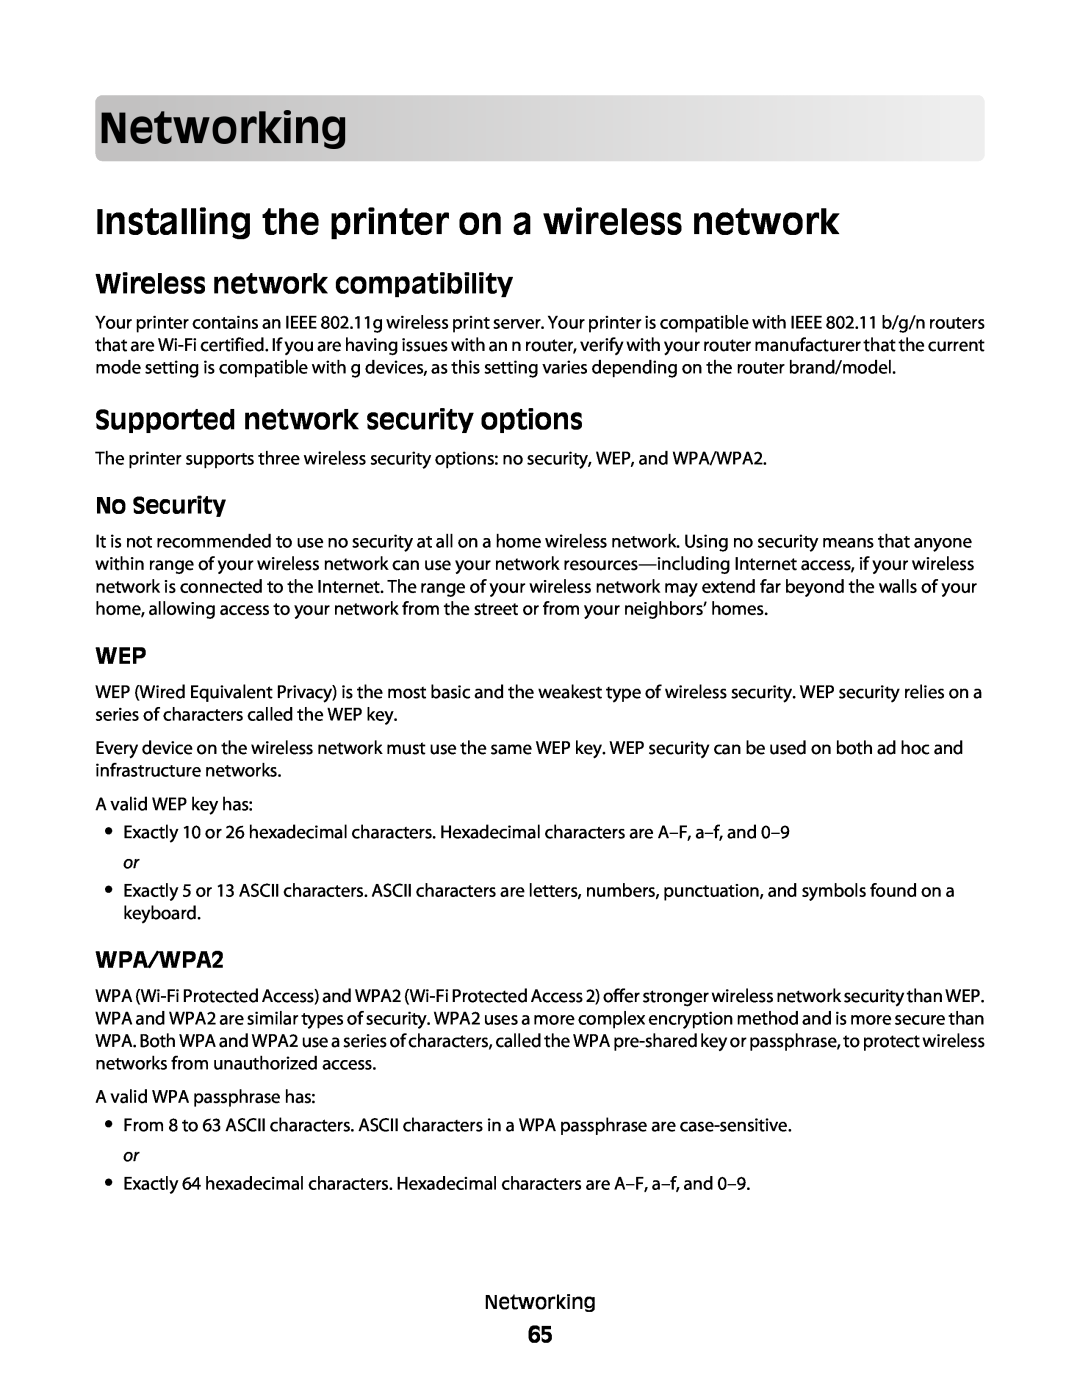 Lexmark 301, S500 Netwo rking, Installing the printer on a wireless network, Wireless network compatibility, No Security 